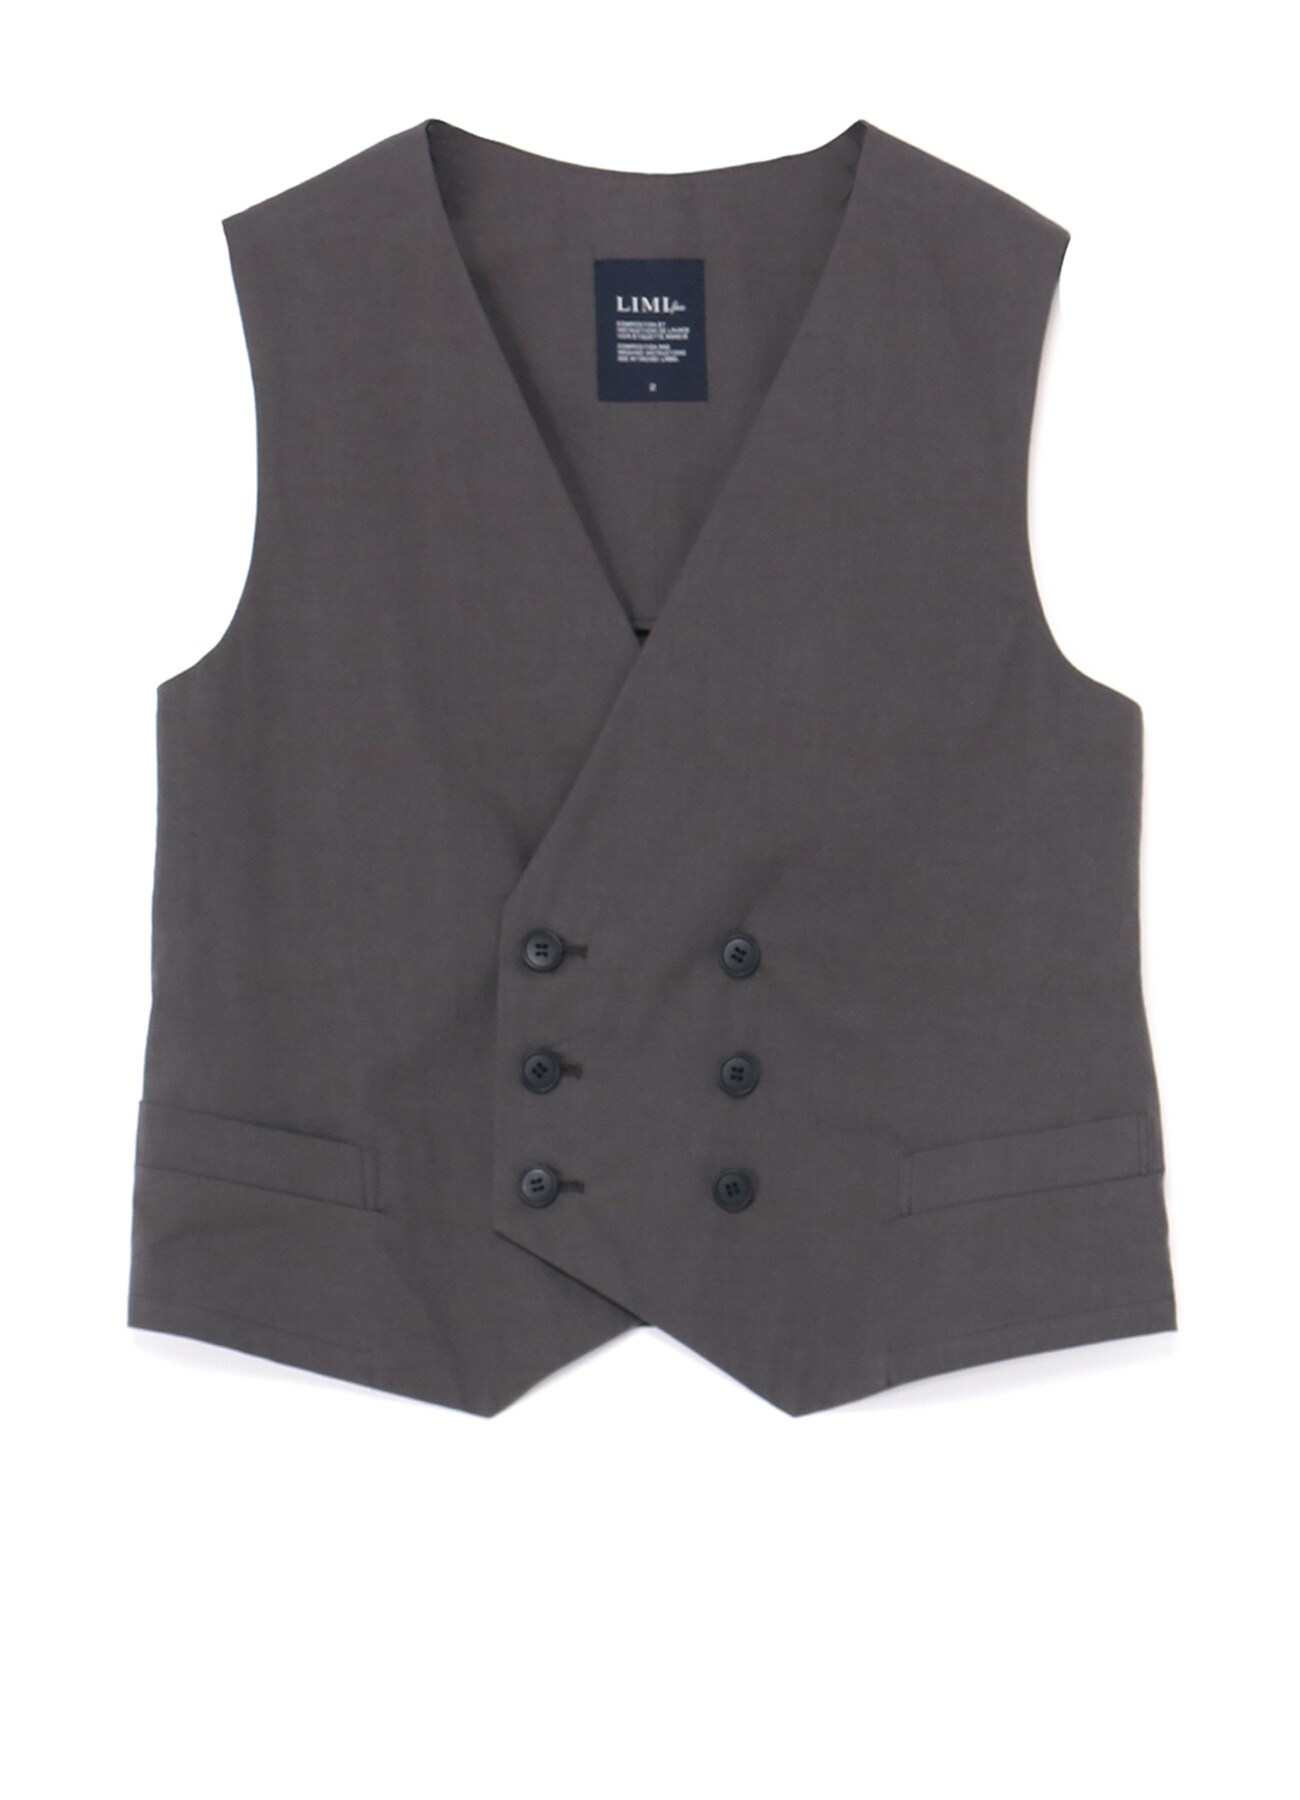 HIGH DENSITY SATIN DOUBLE BREASTED WAISTCOAT WITH HARNESS DETAILS